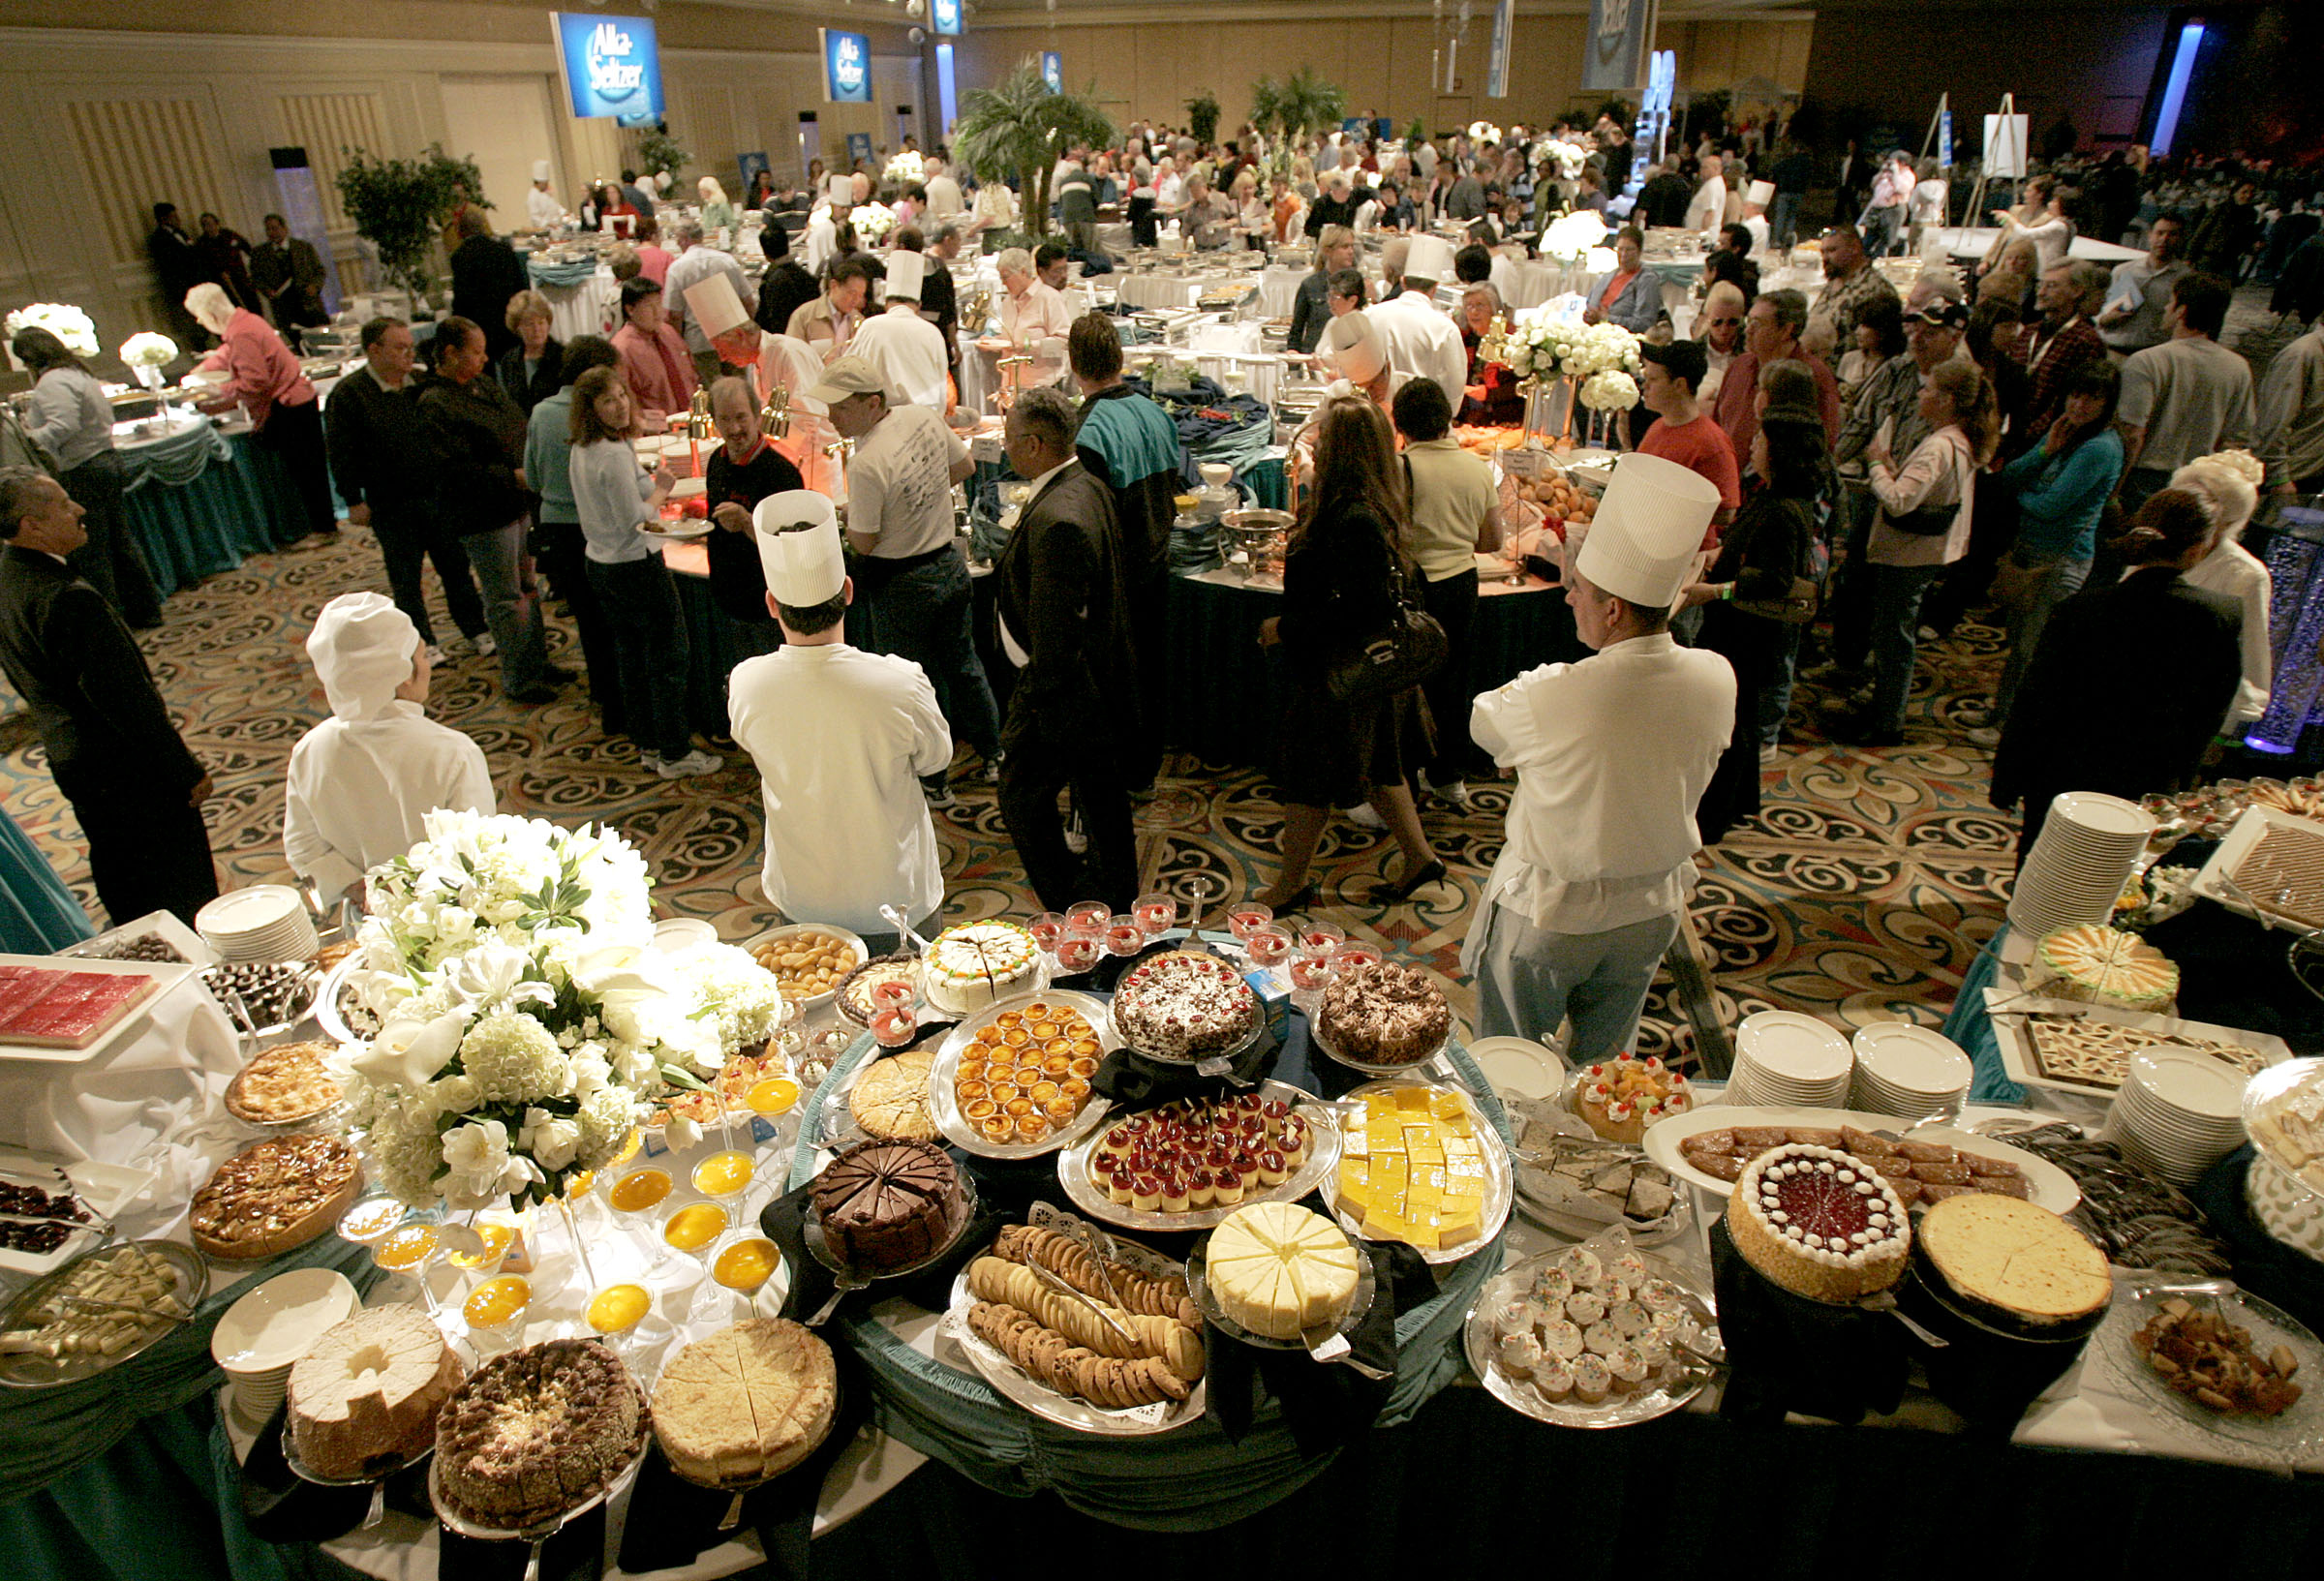 PHOTO: Patrons take food from the buffet line at Las Vegas Hilton in Las Vegas on Tuesday, March 28, 2006.